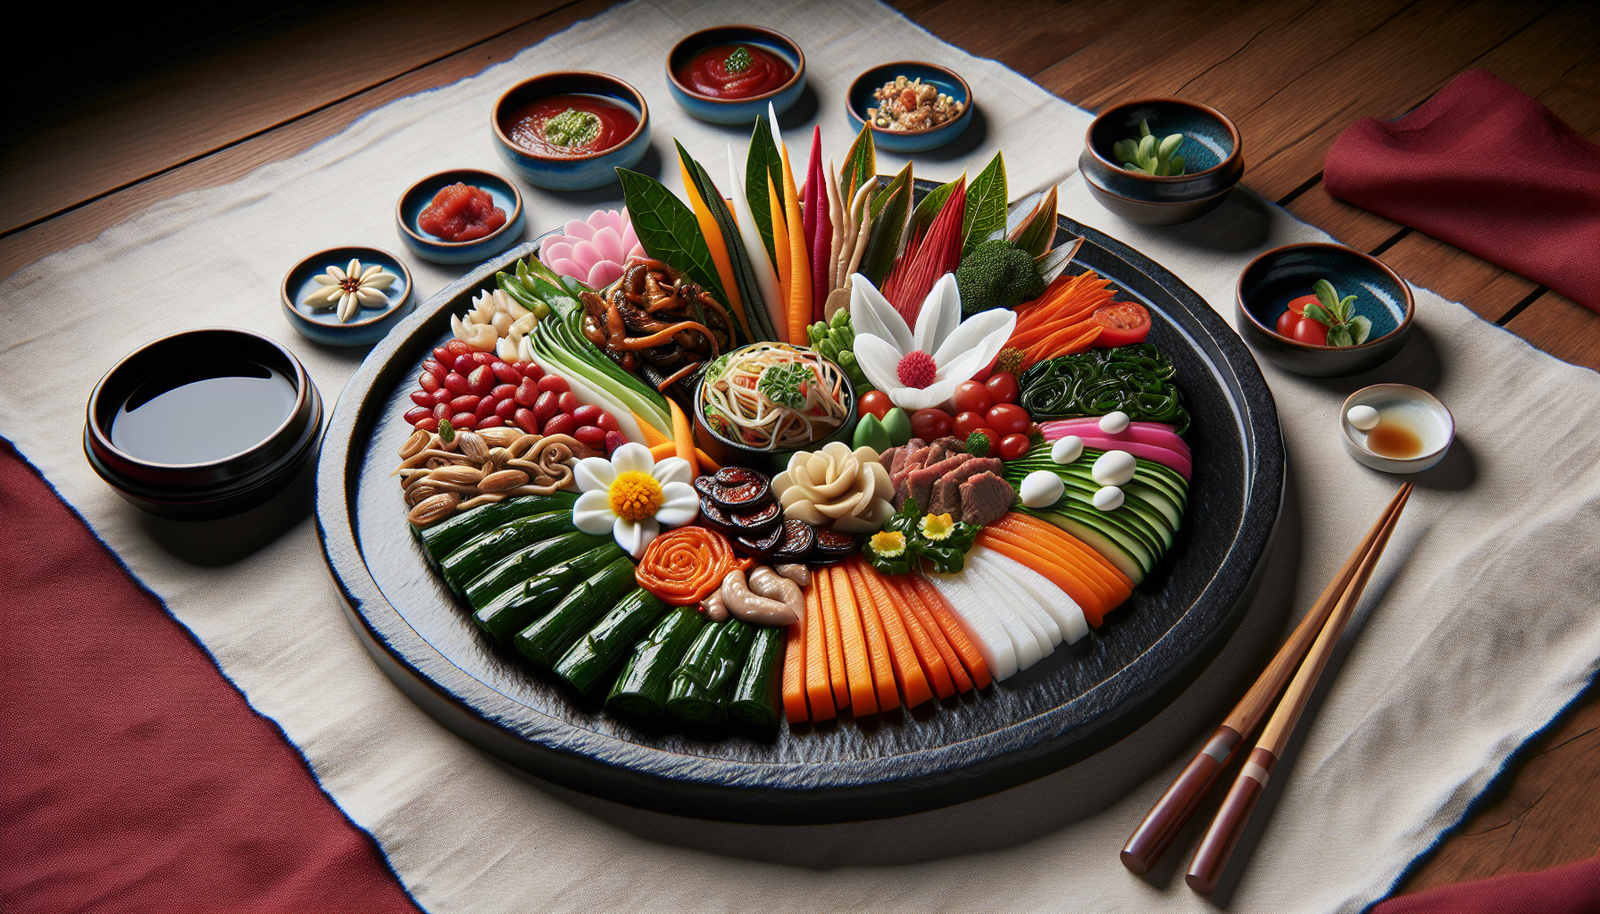 How Do You Create Visually Stunning Dishes Using Traditional Korean Ingredients?